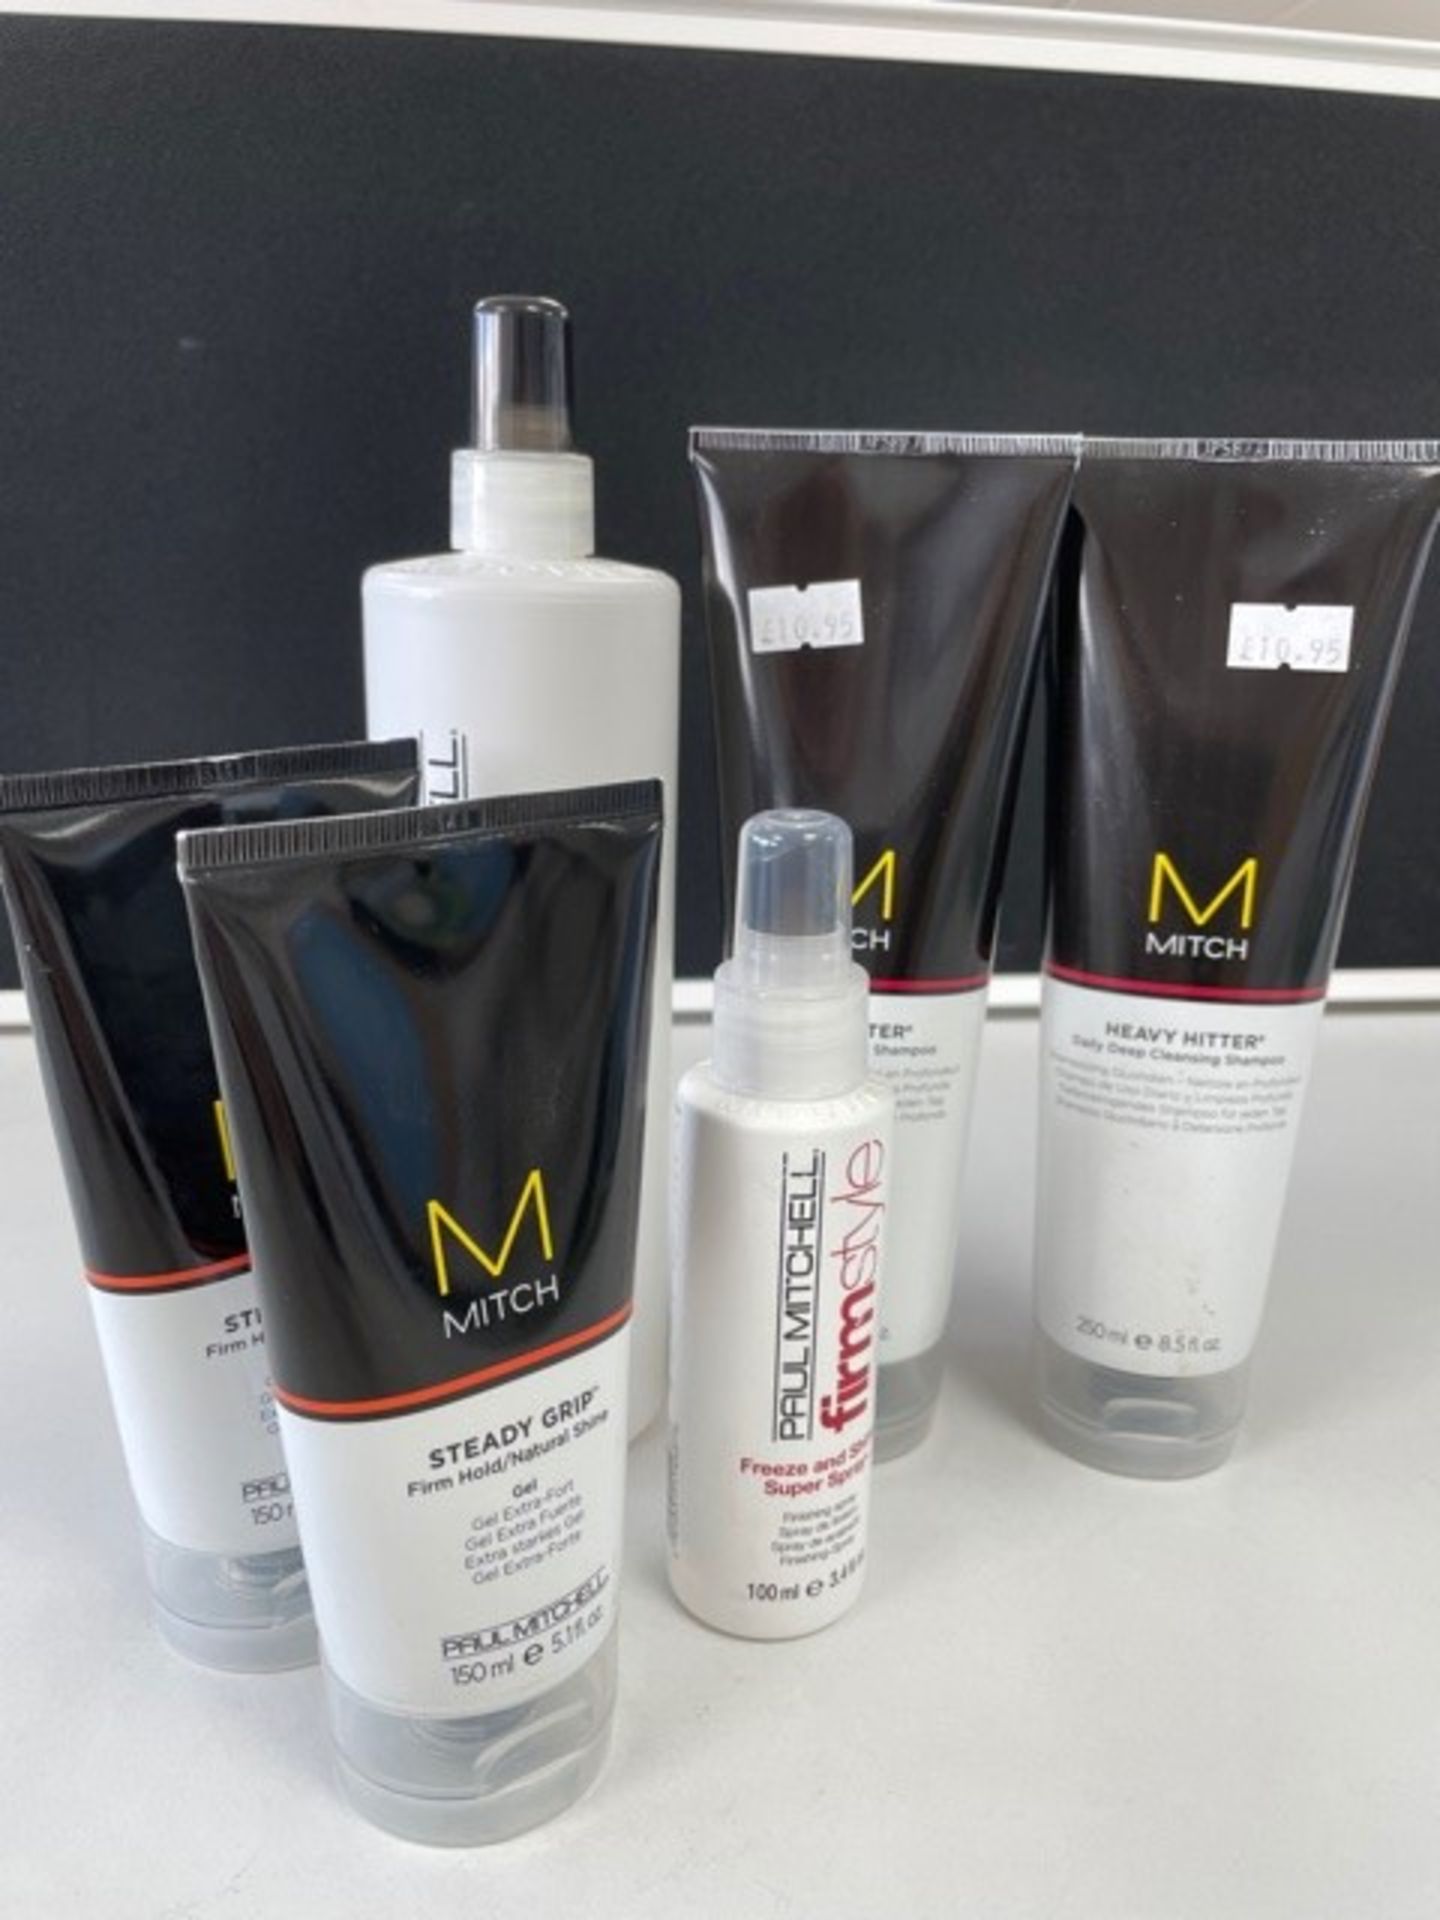 6 x Paul Mitchell Hair Care Products | See photographs and description | Total RRP £76.85